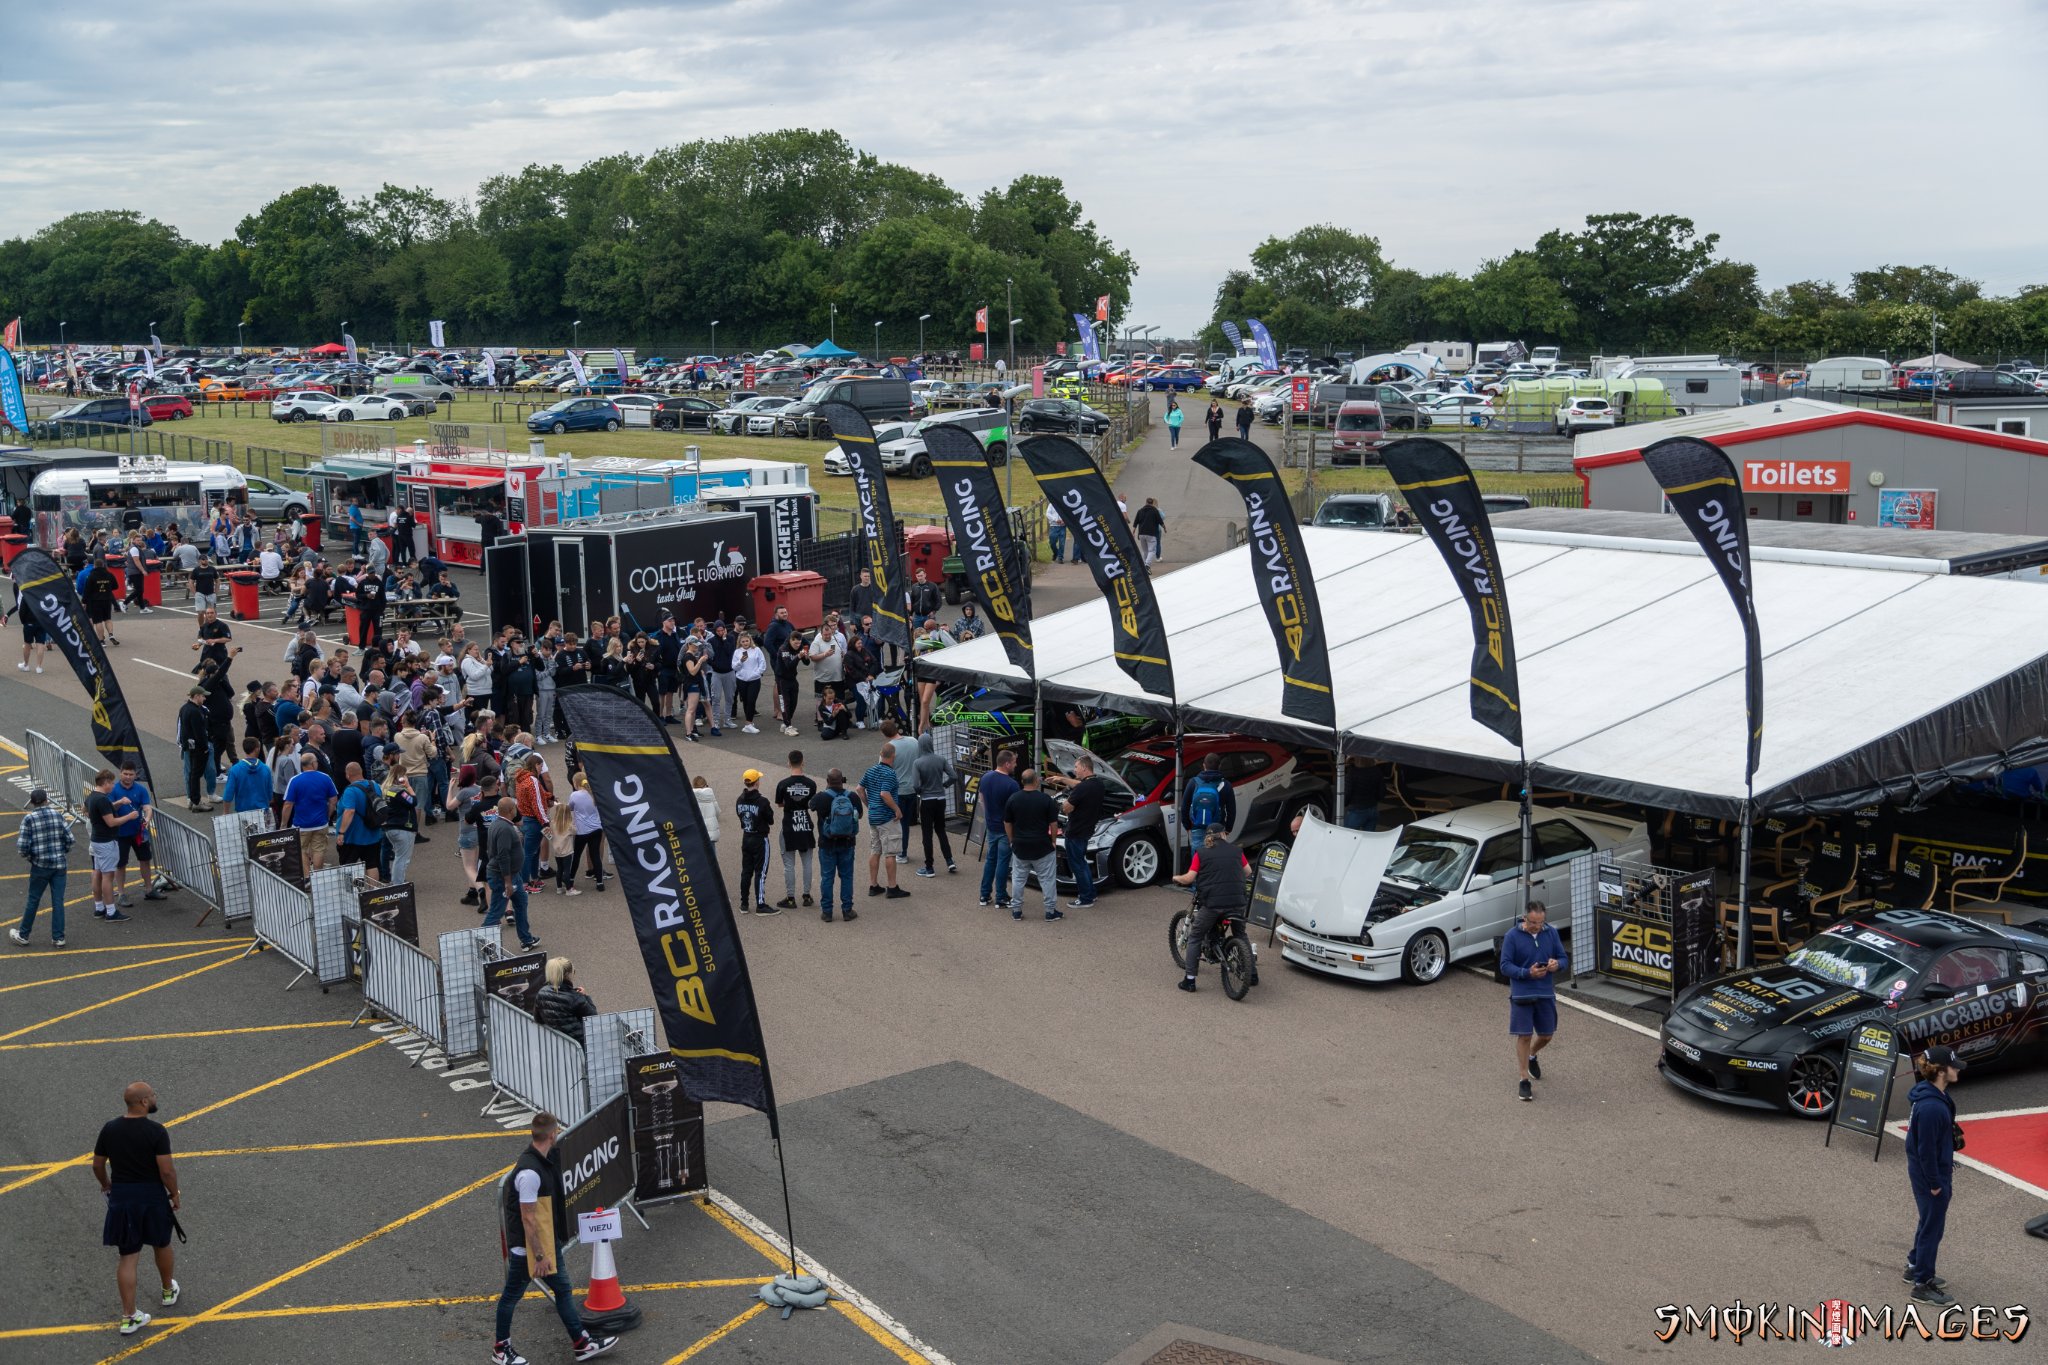 Grip and slip – putting on a show at Tunerfest South 